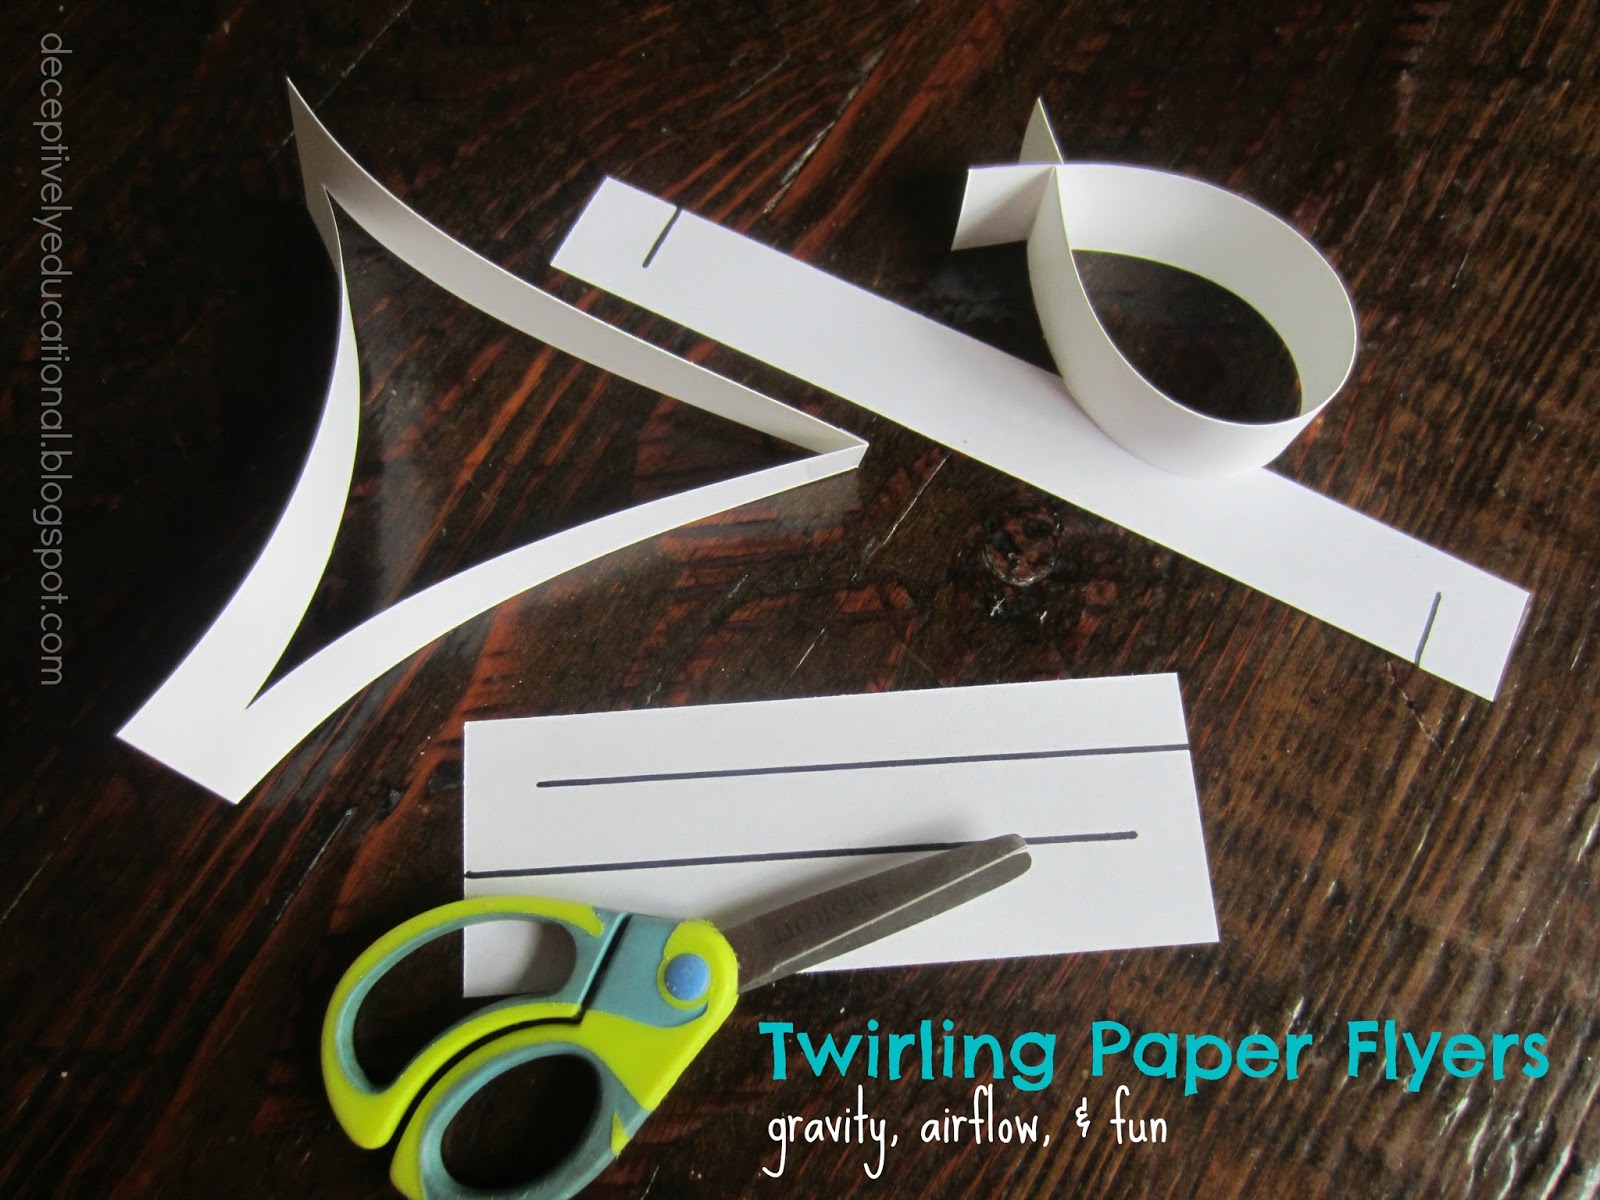 Relentlessly Fun, Deceptively Educational: Twirling Paper Flyers